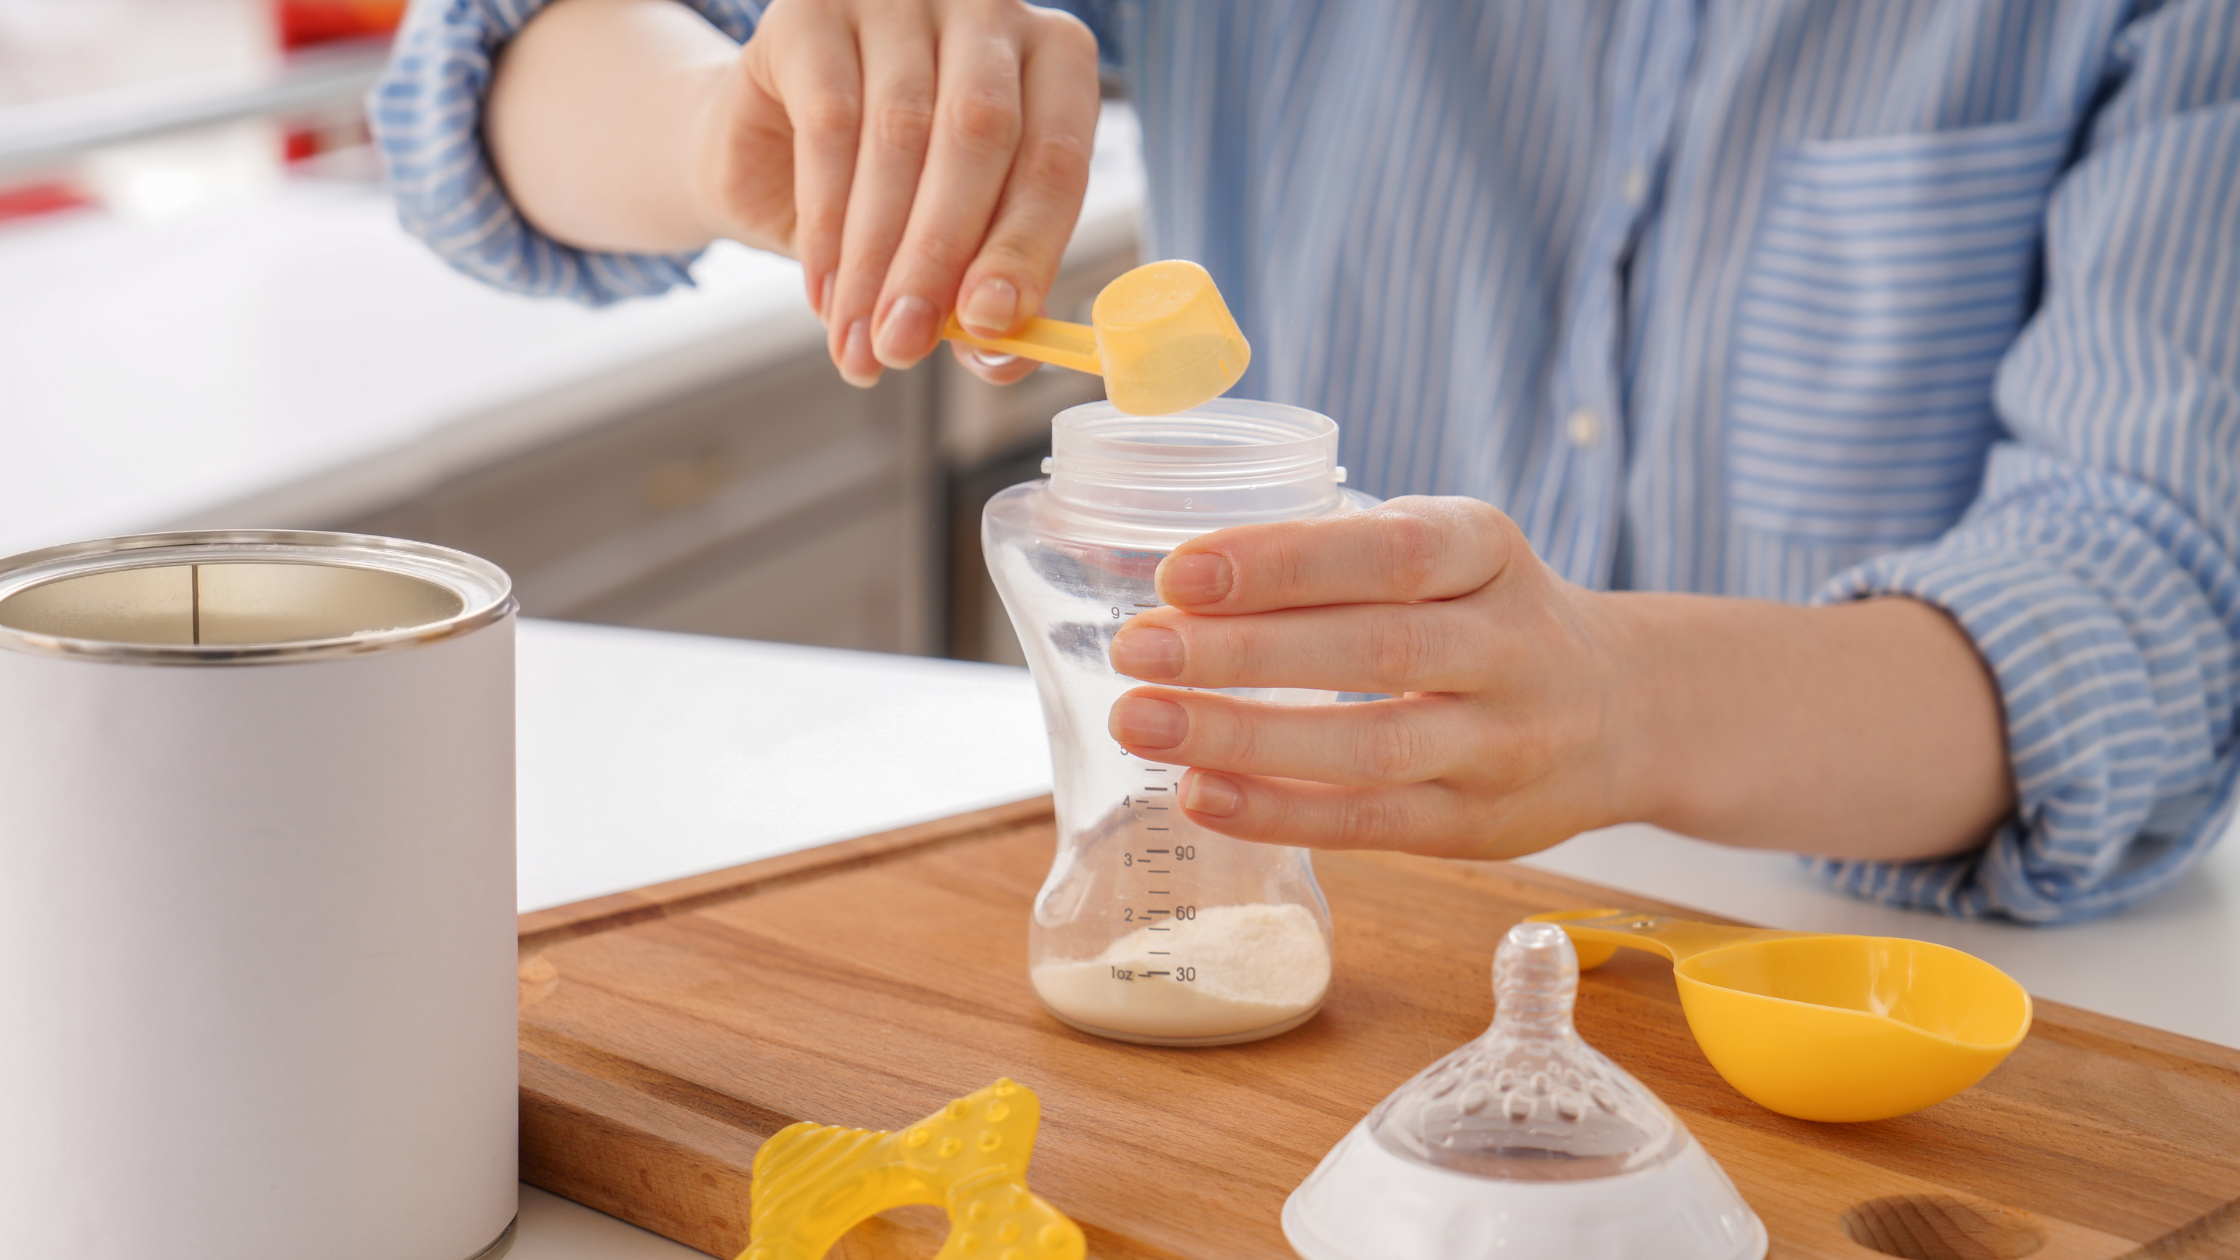 How To Get Started With Formula Feeding - The Full Breakdown - MHA Blog Featured Image